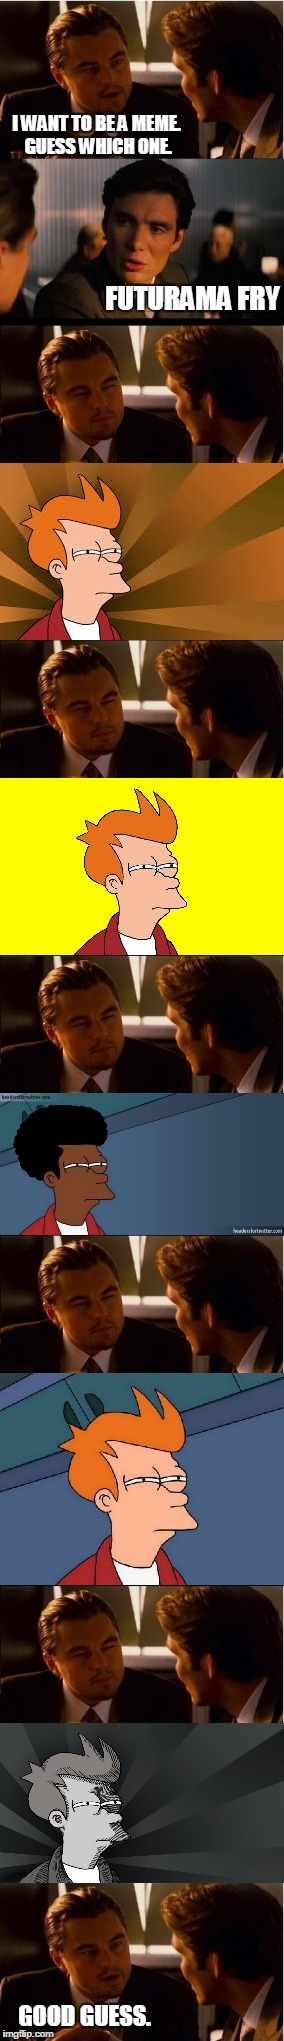 It's an Inception / Fry squint-off! | I WANT TO BE A MEME. GUESS WHICH ONE. FUTURAMA FRY GOOD GUESS. | image tagged in inception,futurama,fry,futurama fry | made w/ Imgflip meme maker